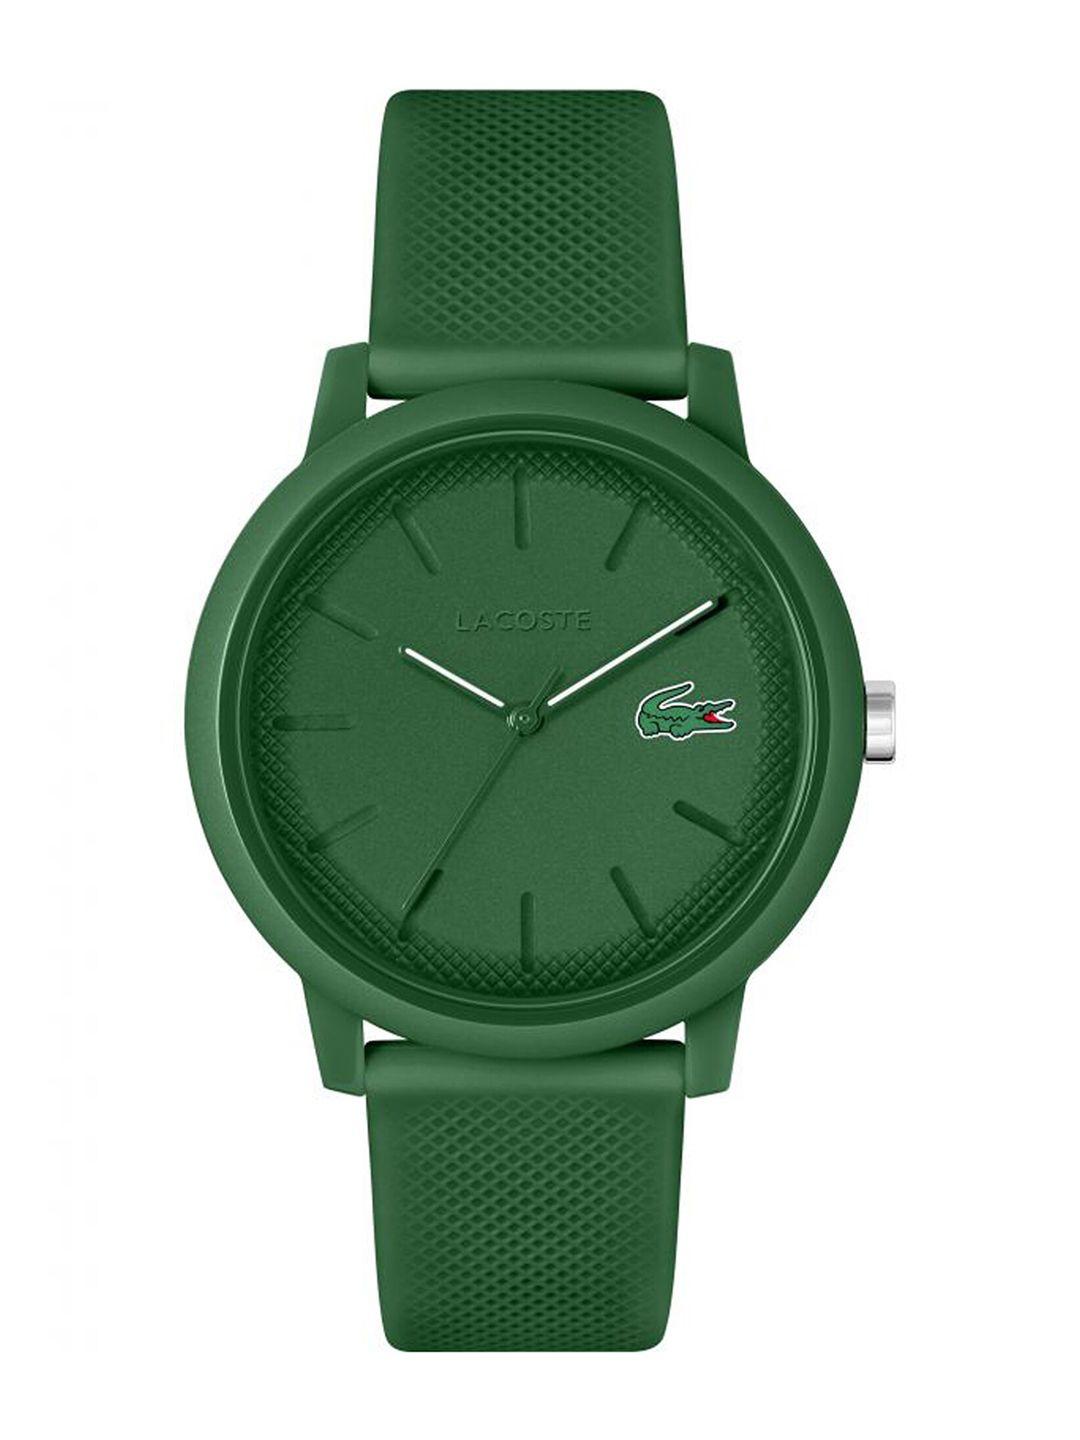 lacoste-men-brass-dial-&-silicon-straps-analogue-watch-2011170